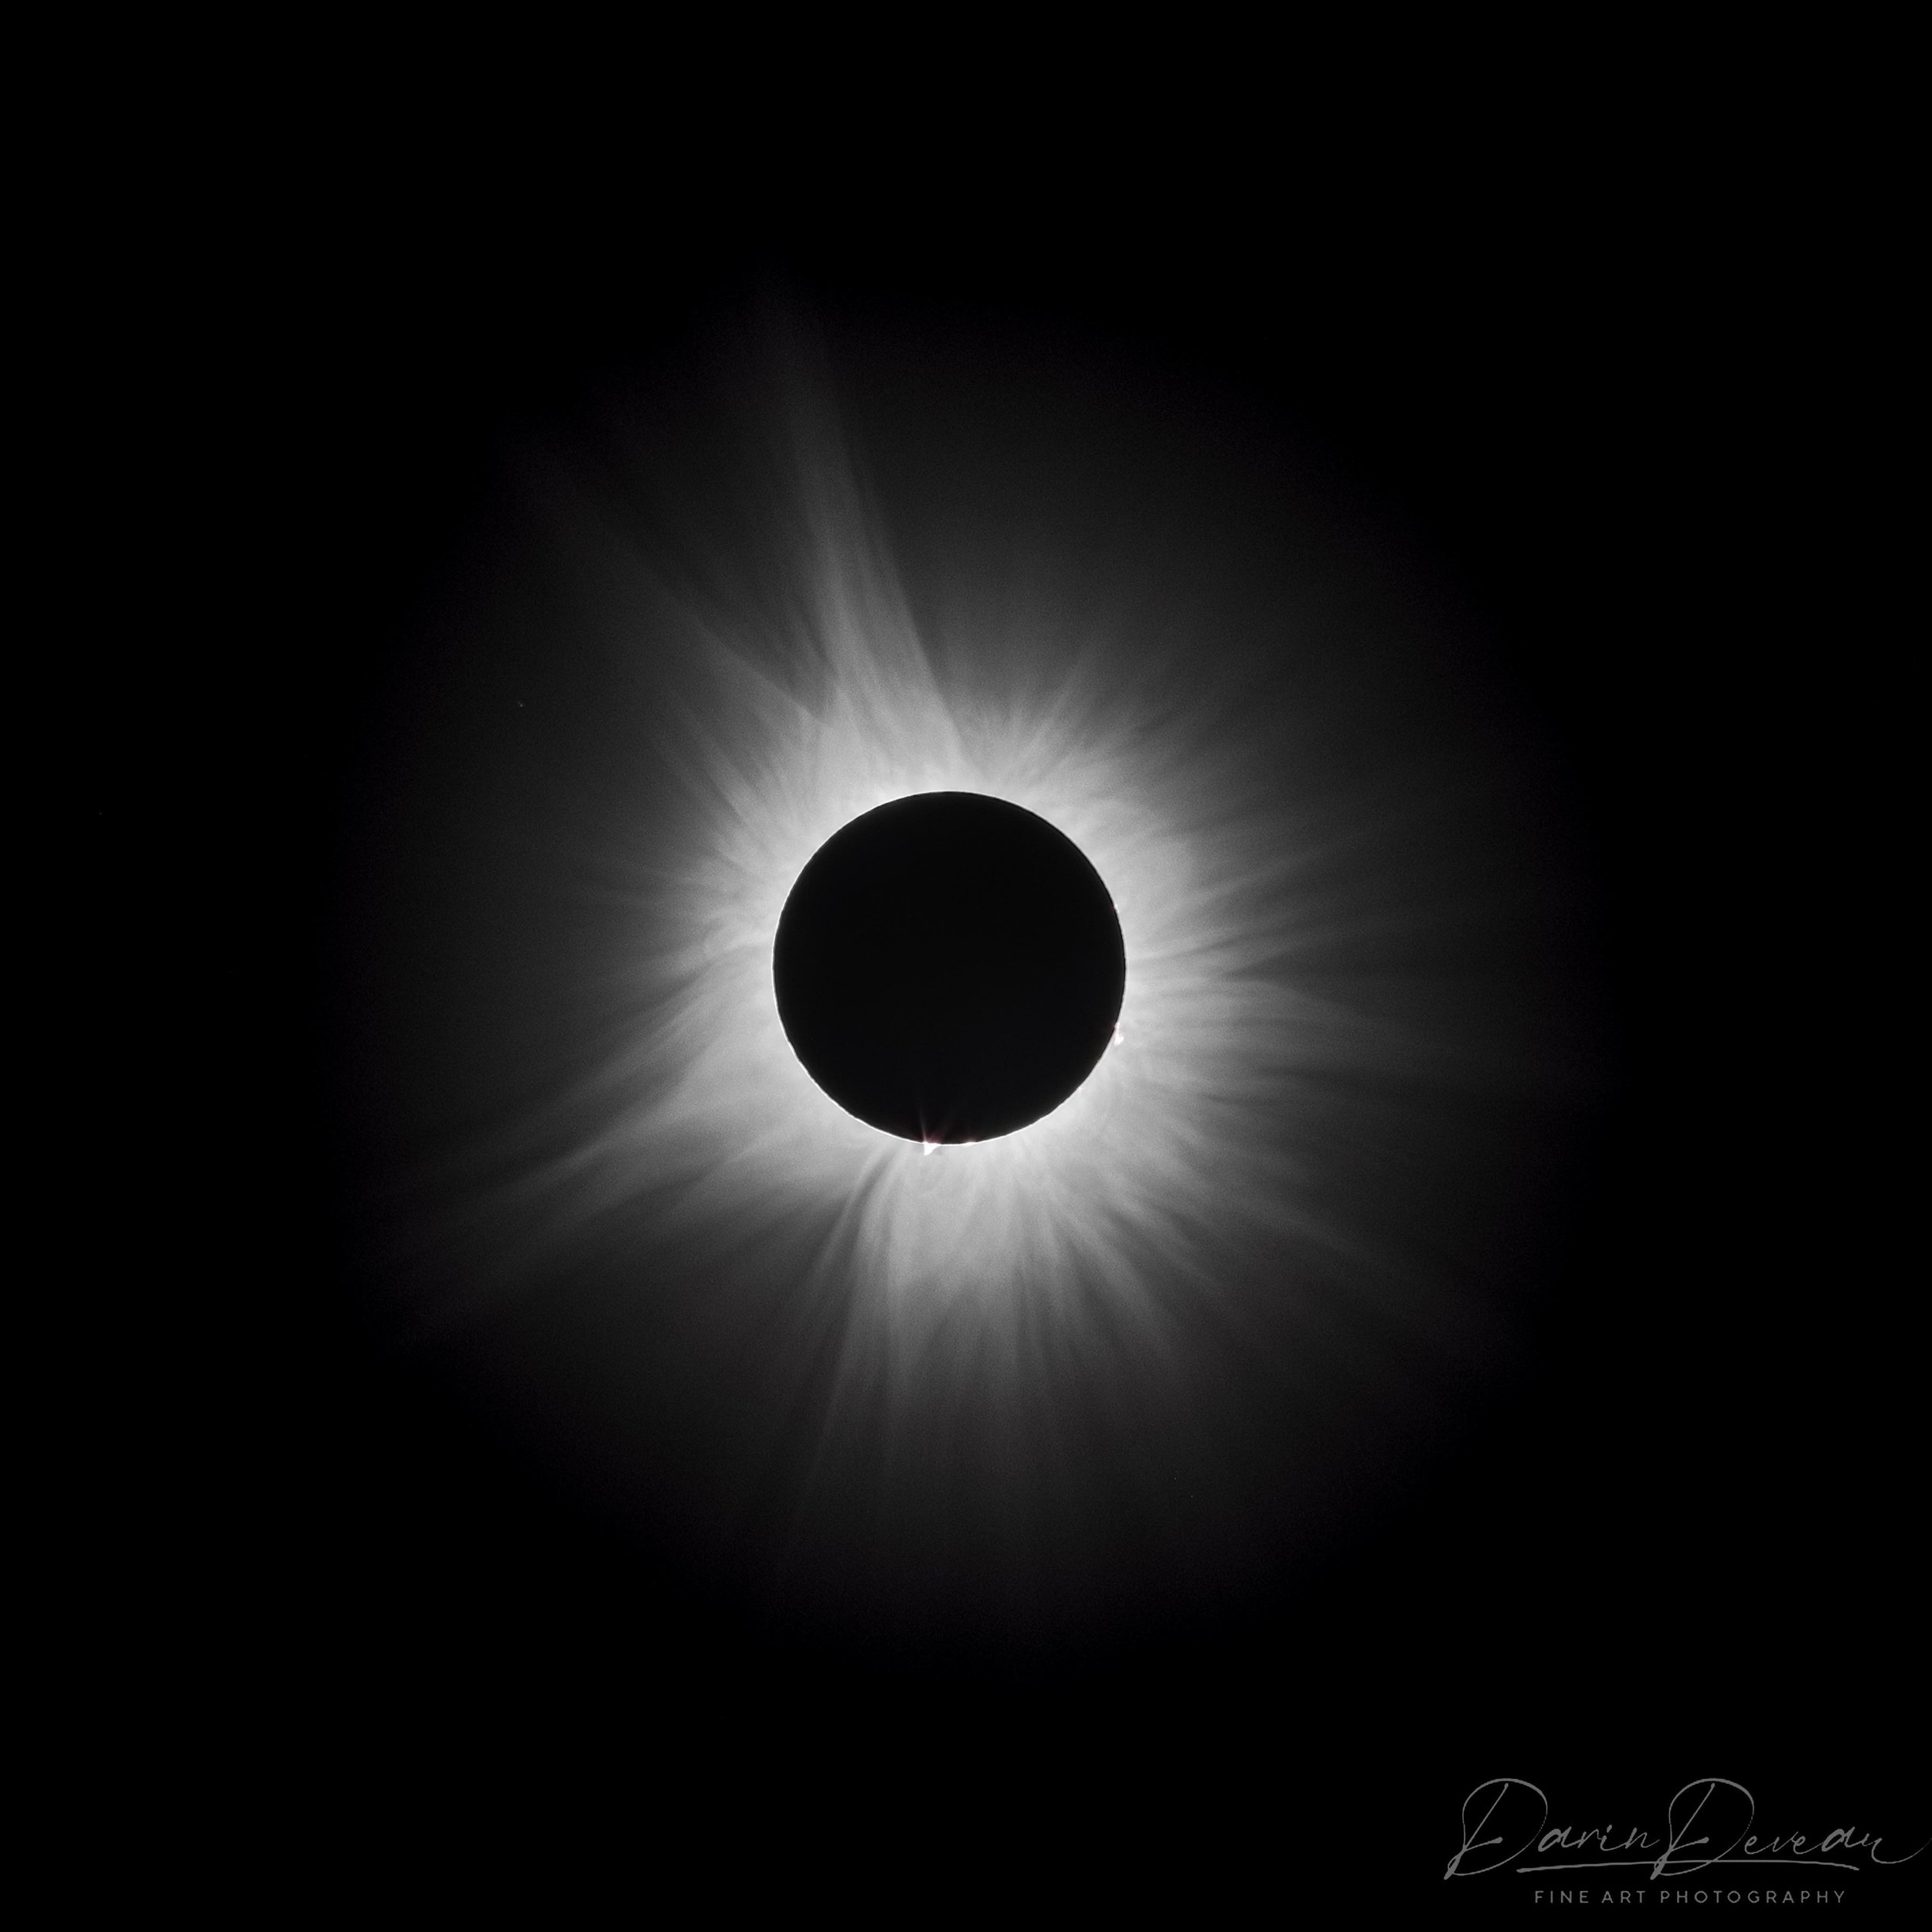 10-layer composite photo of the eclipse taken in Franklin, IN. Words simply can&rsquo;t express what an experience something like this is. 

#eclipse #totalsolareclipse #2024eclipse #inw&times; #indiana
#photography #astrophotography @sigmaphoto
@can